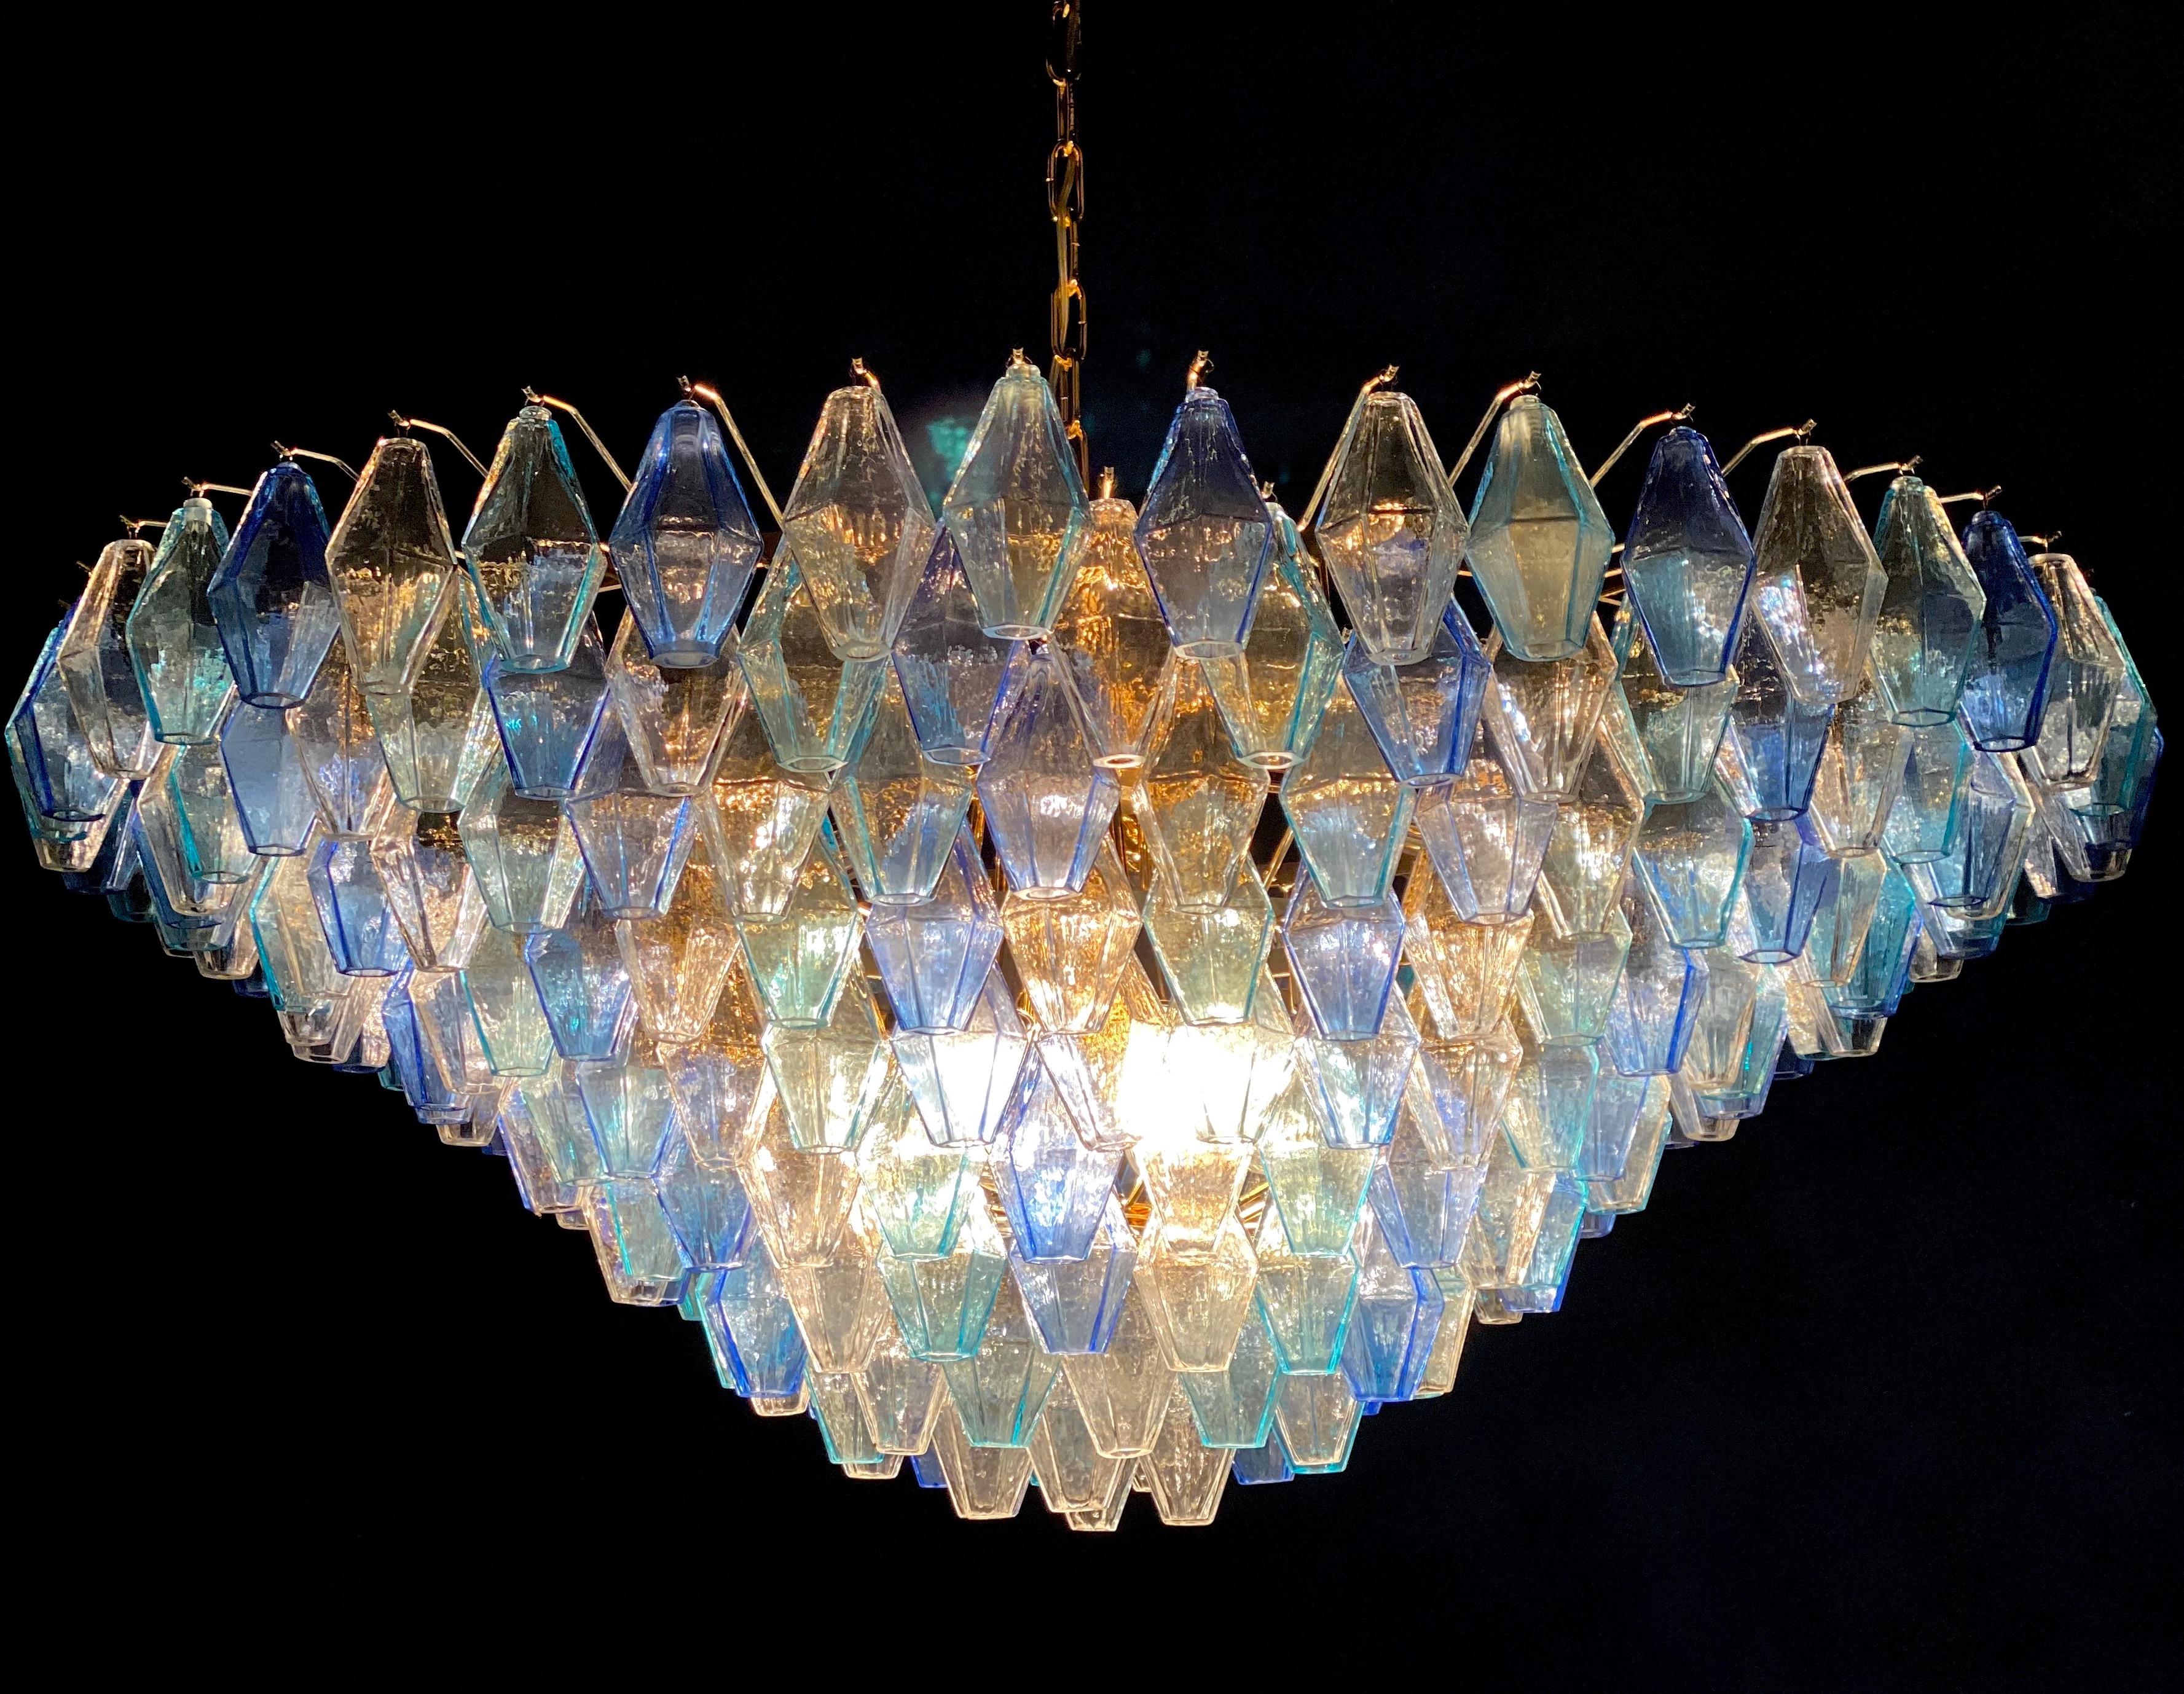 This huge striking chandelier consists of 253 hand blown Ice, heavenly and blue colored 